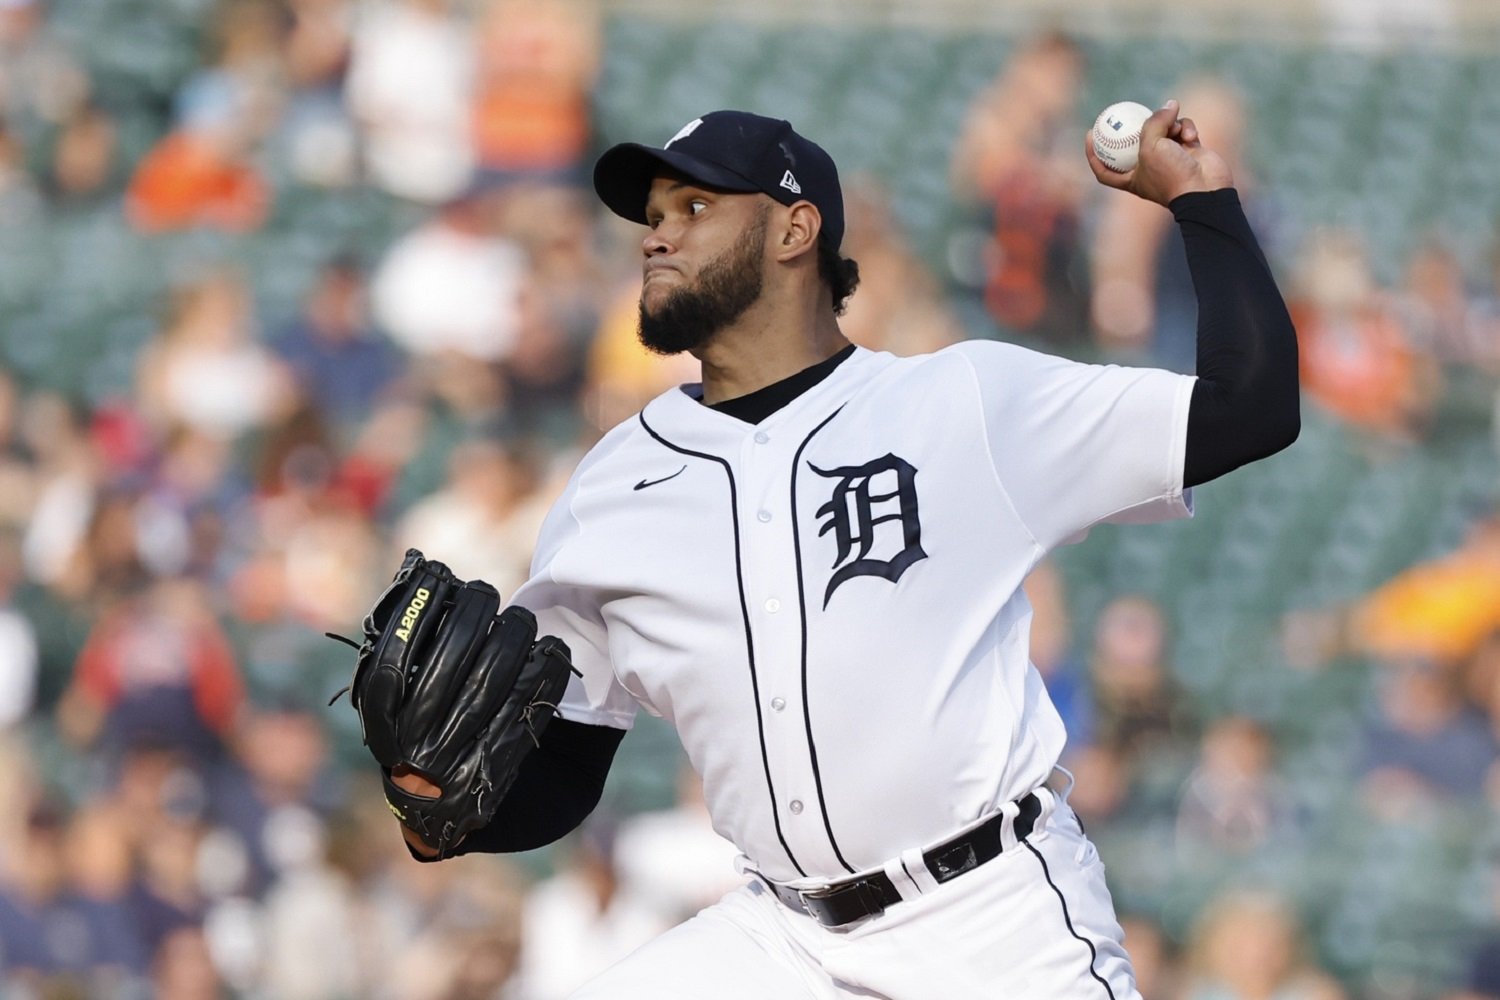 Tigers win streak ends, Cubs continues, Sox split DH – Wednesday